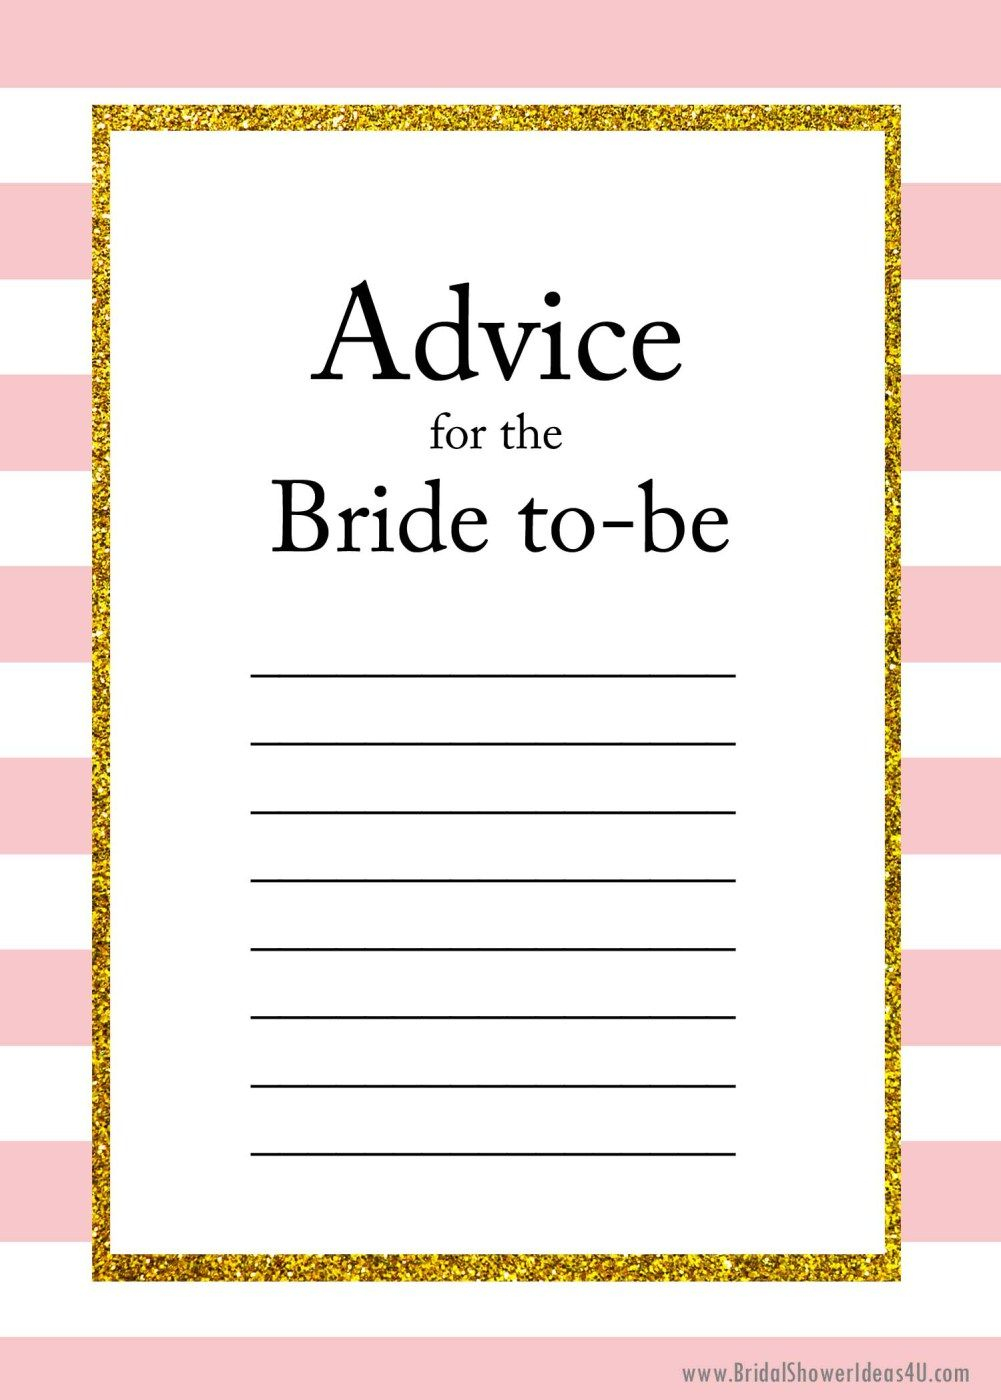 Free Printable Advice For The Bride To Be Cards | Friendship - Free Printable Bridal Shower Cards